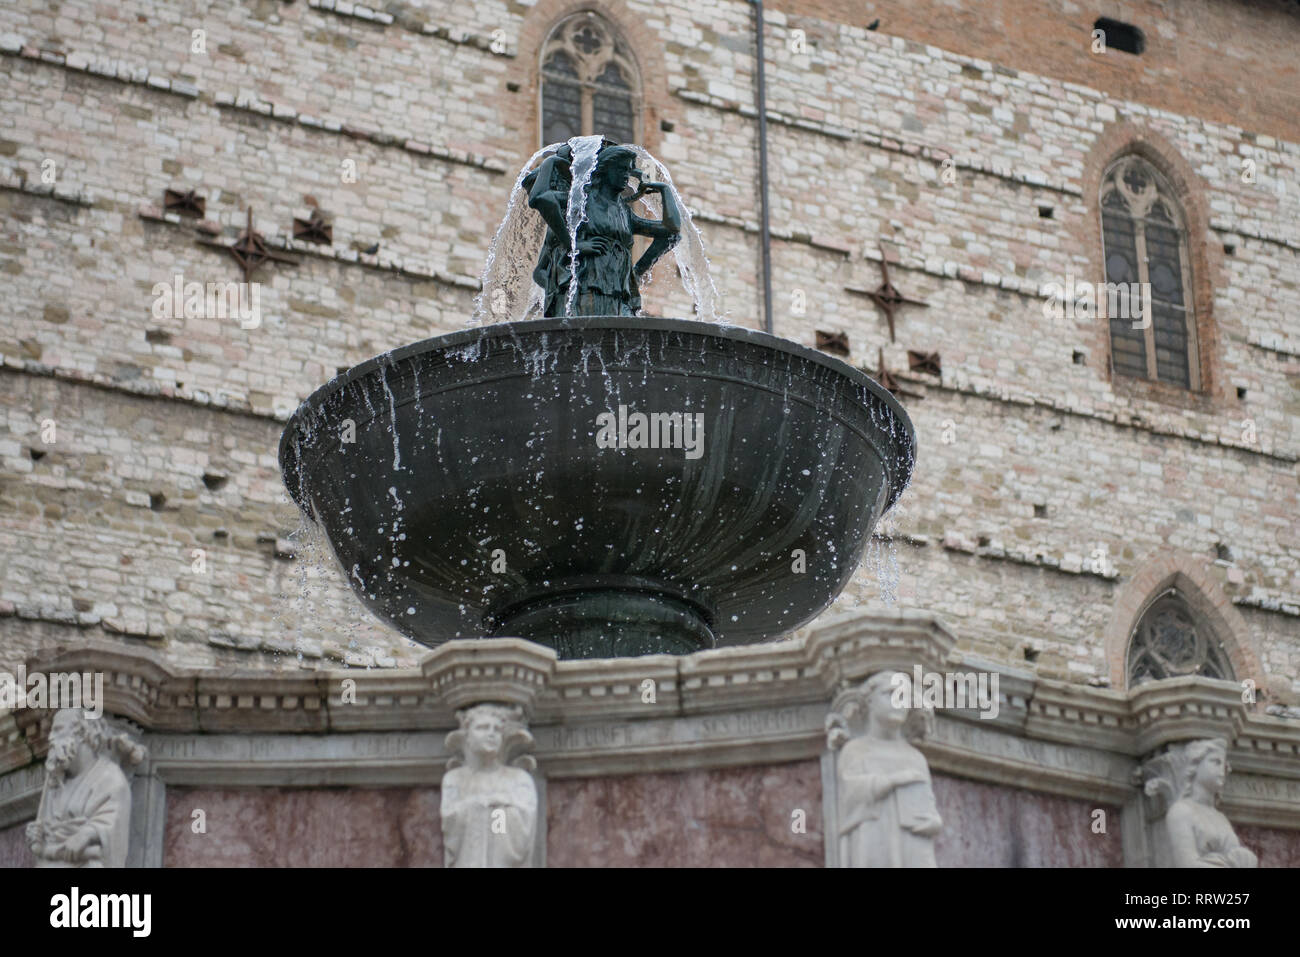 Fontana Maggiore, a medieval fountain in the ancient city of Perugia in Umbria, Italy Stock Photo